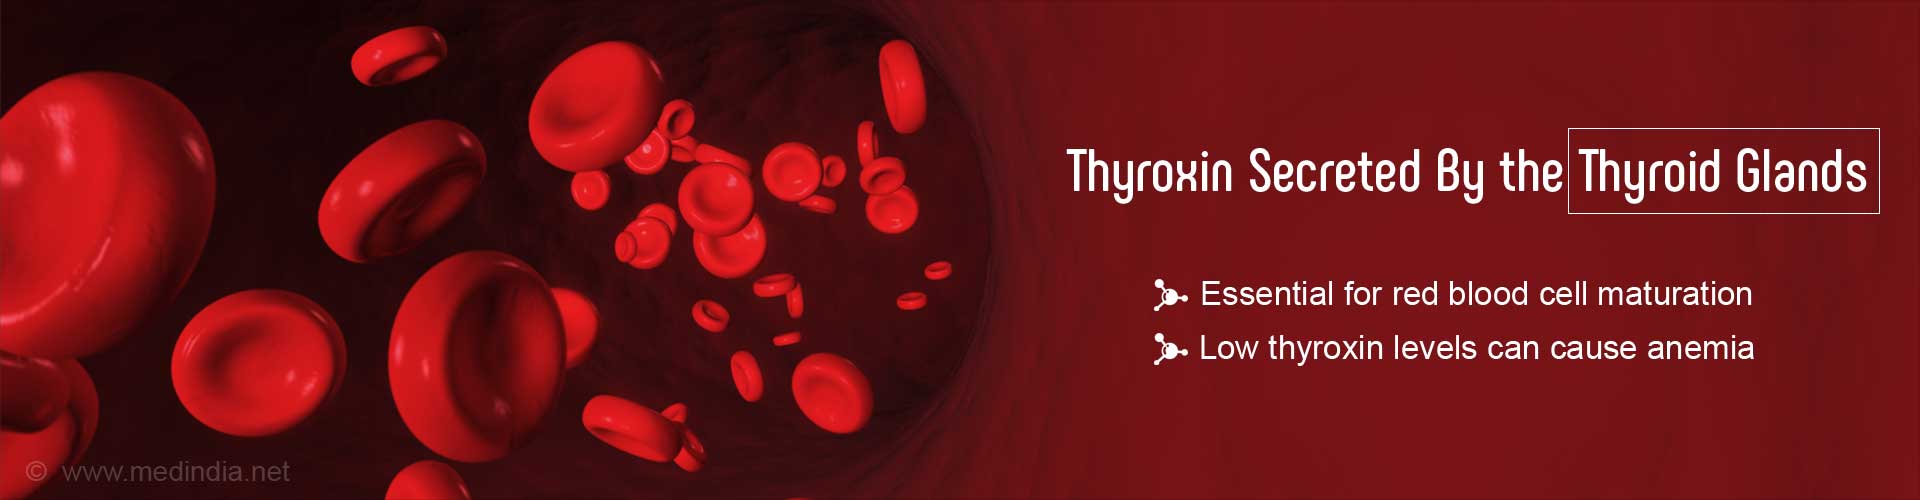 Thyroxin secreted by the thyroid glands
- essential for red blood cell maturation
- low thyroxin levels can cause anemia 